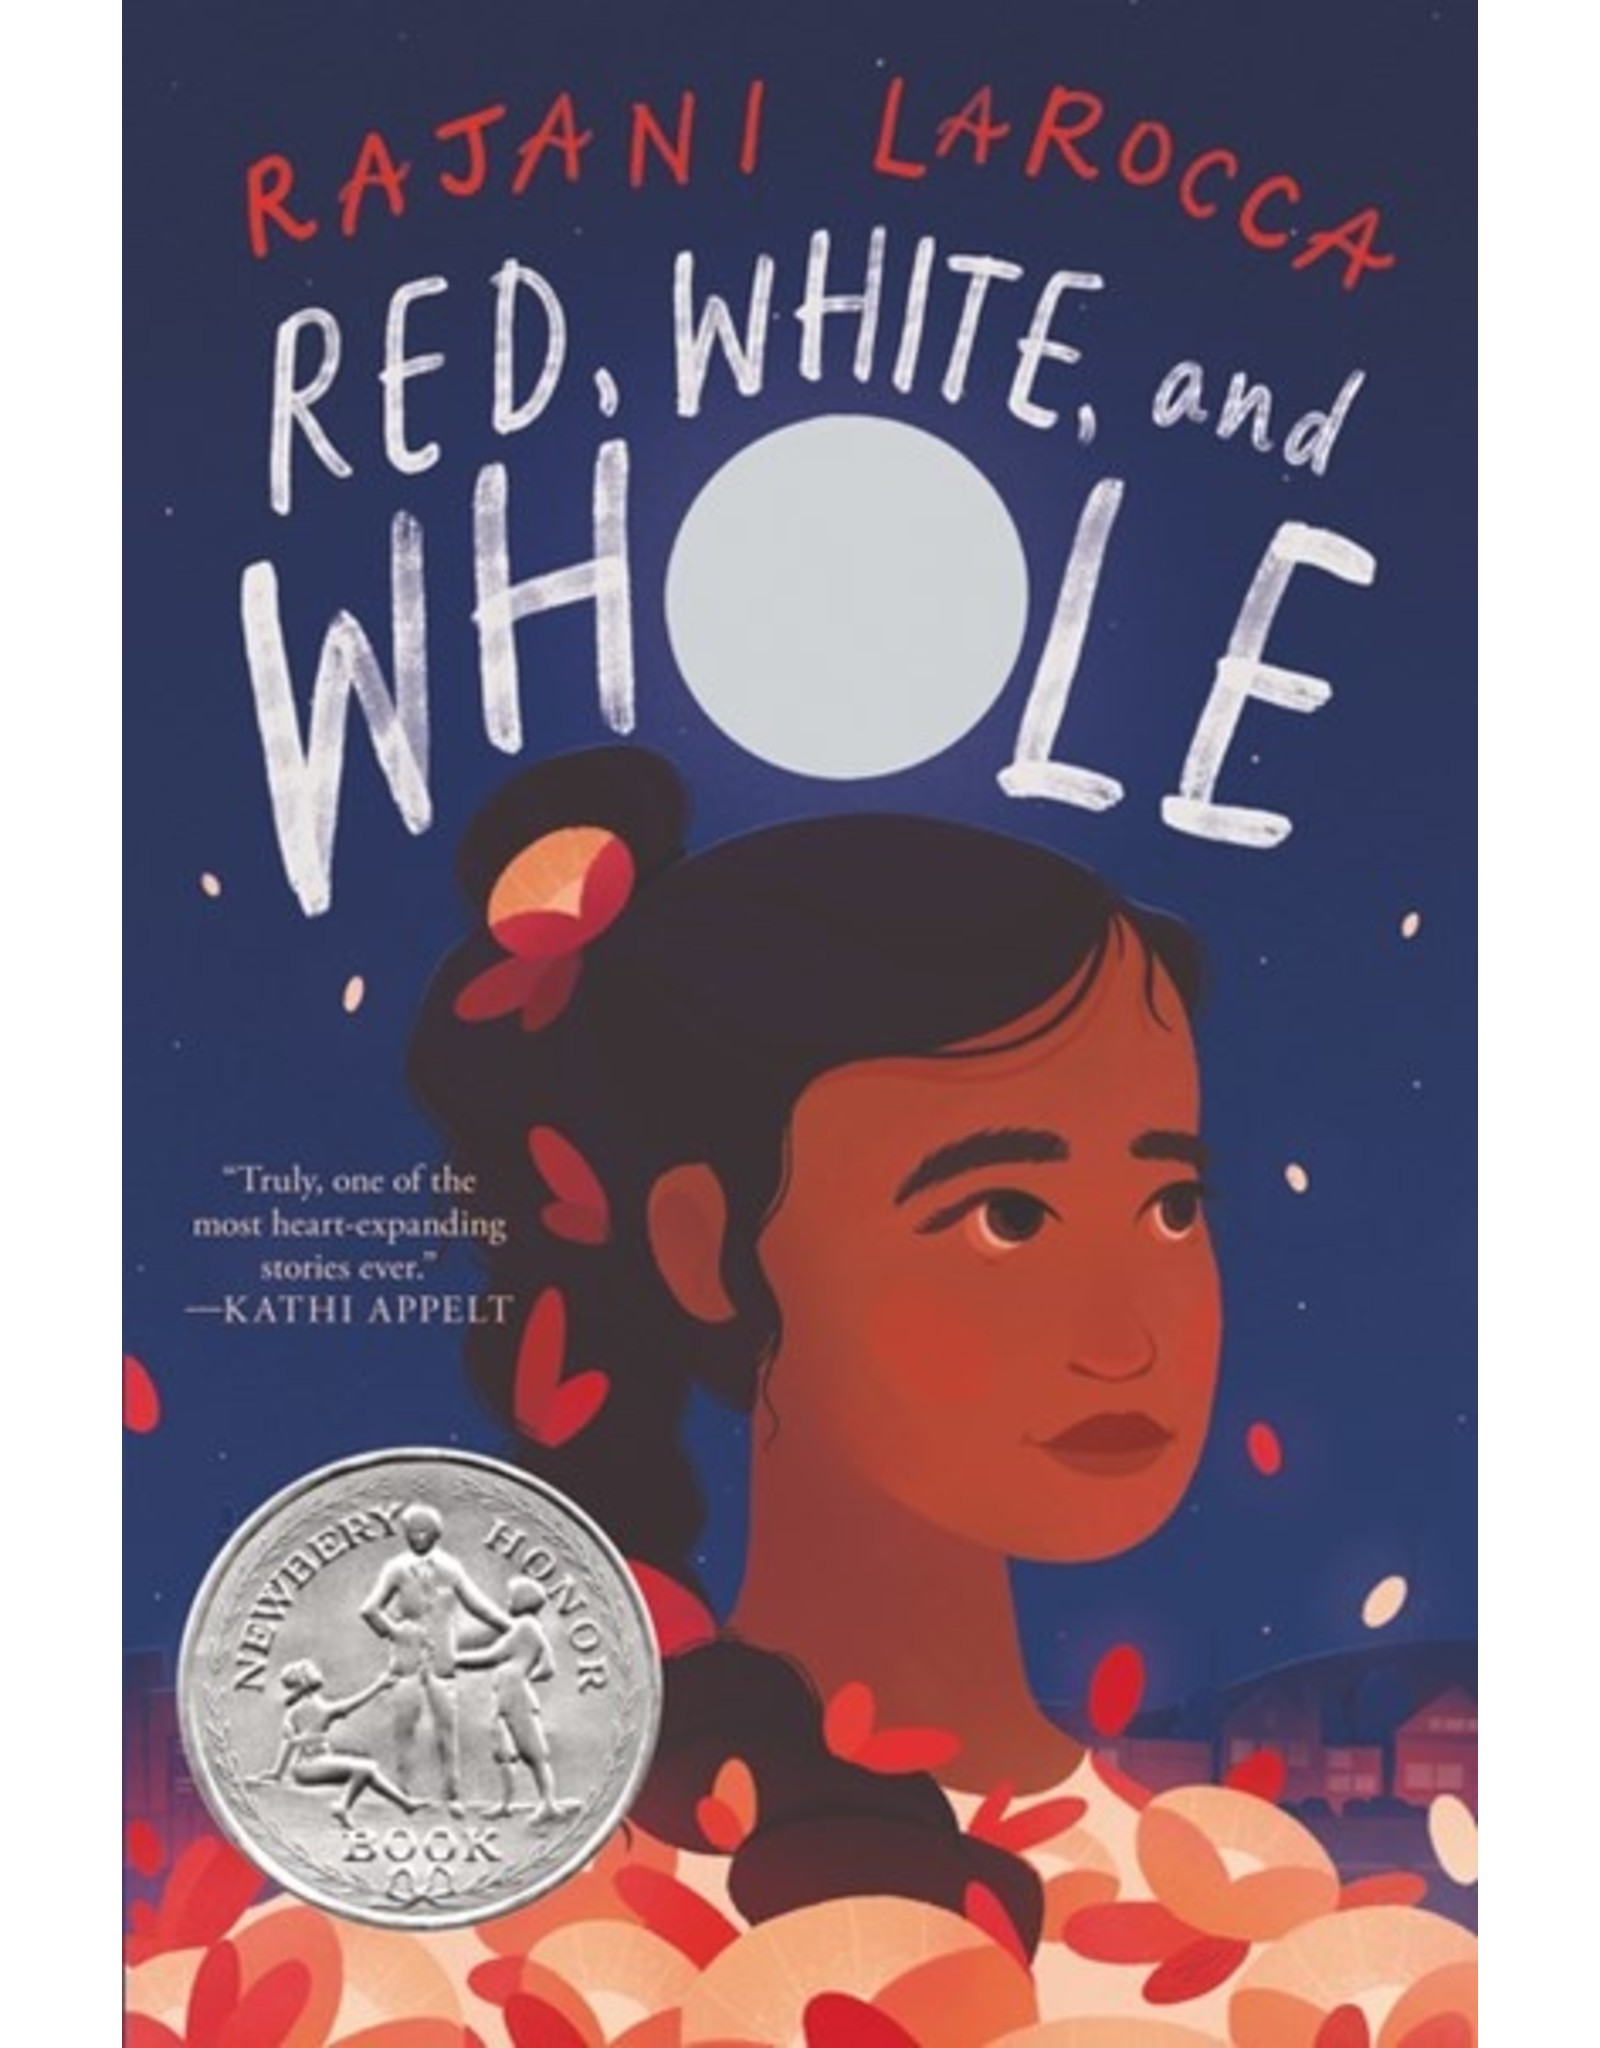 Books Red, White and Whole by Rajani Larocca.